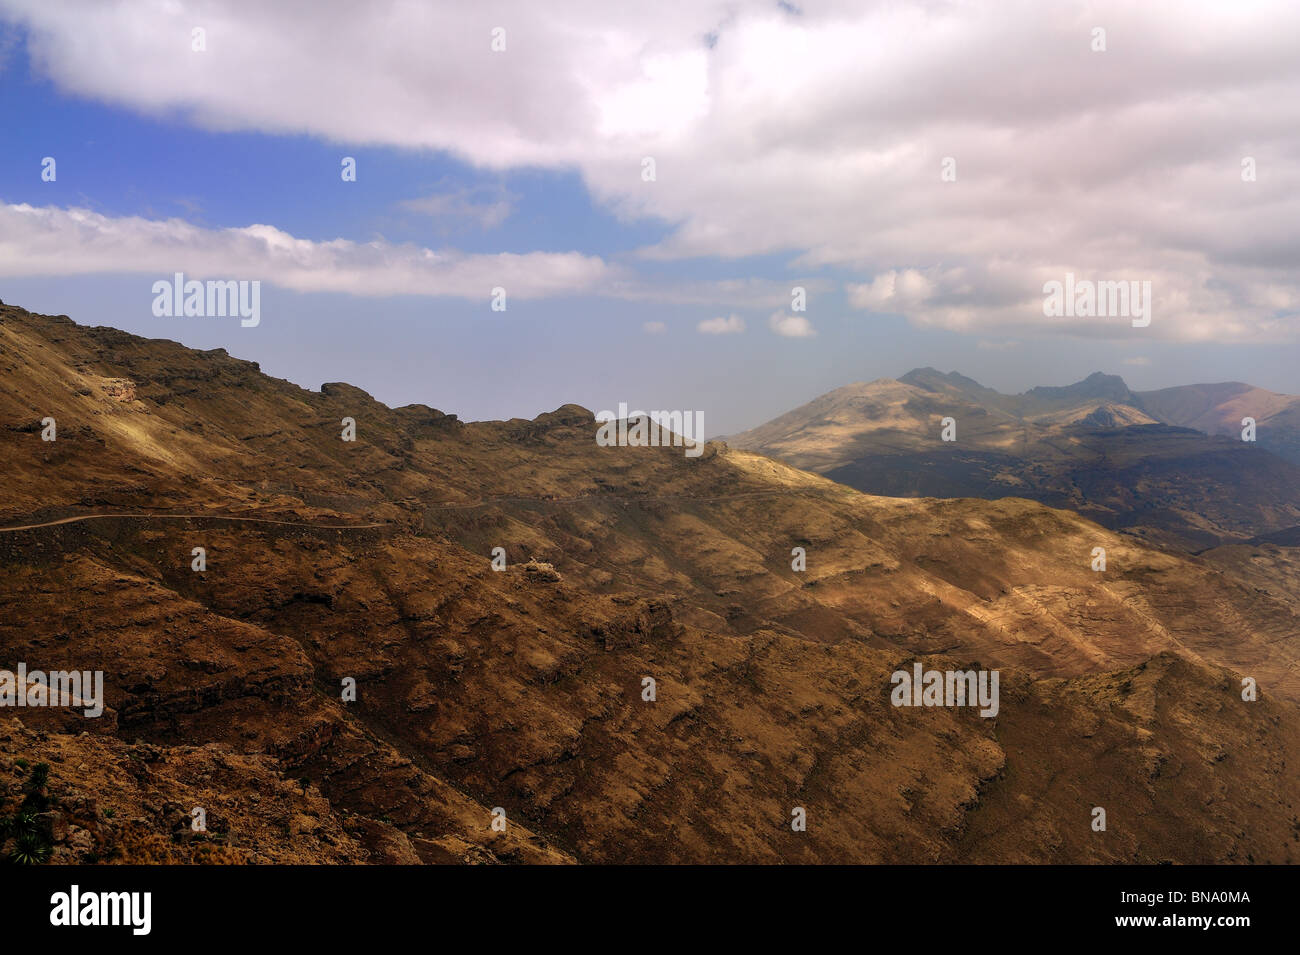 Landscape over Simien Mountains Stock Photo